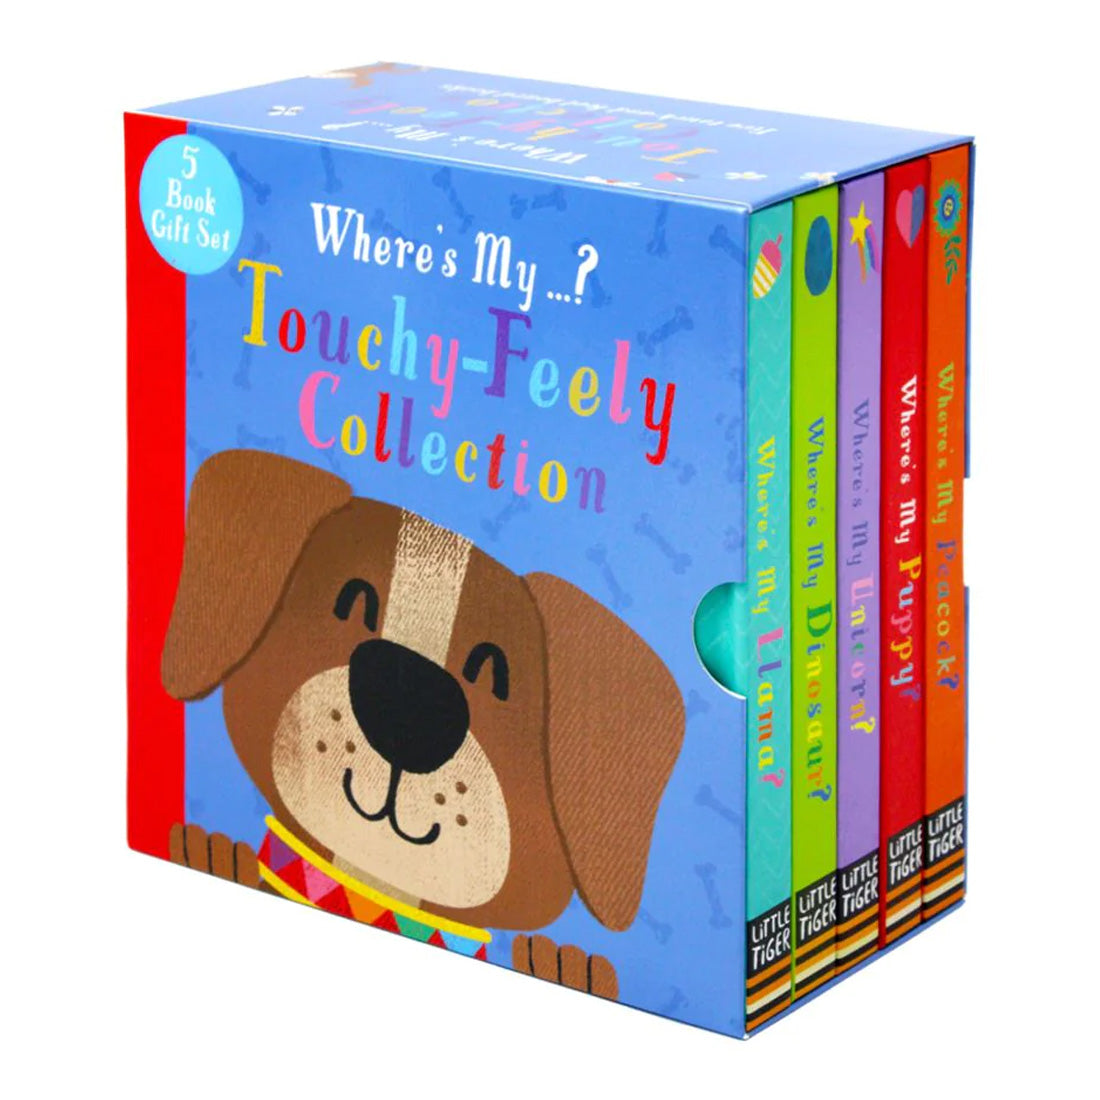 Where's My...? Touchy Feely Collection (5 Books Set)